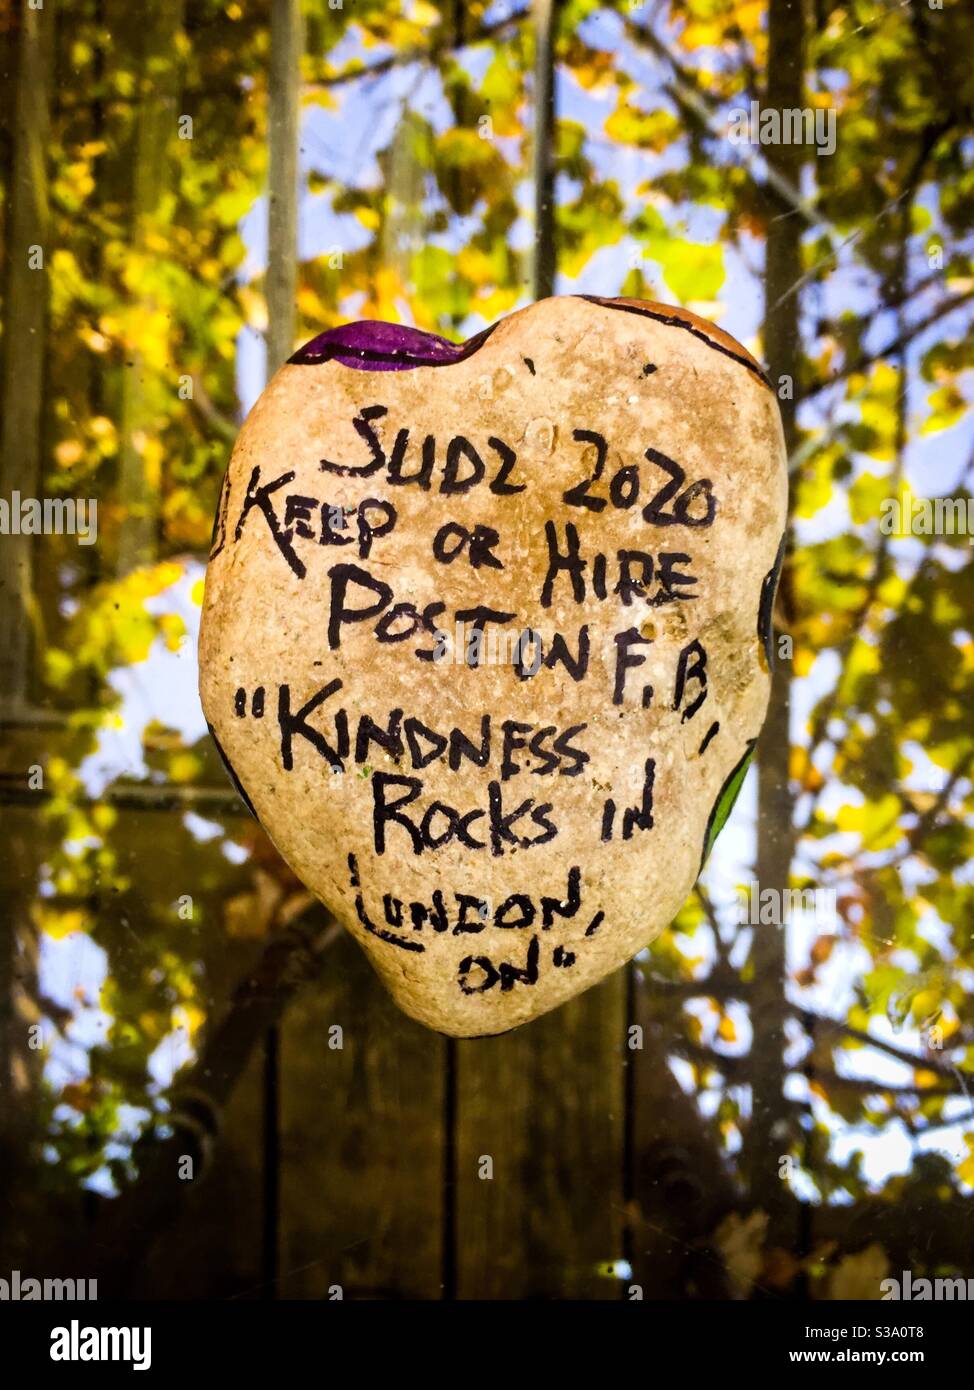 Kindness Rock, a local initiative to promote compassion, kindness, and empathy. No hate. Kindness rocks. Social media connection. F.B. Post. Ontario, Canada. Stock Photo